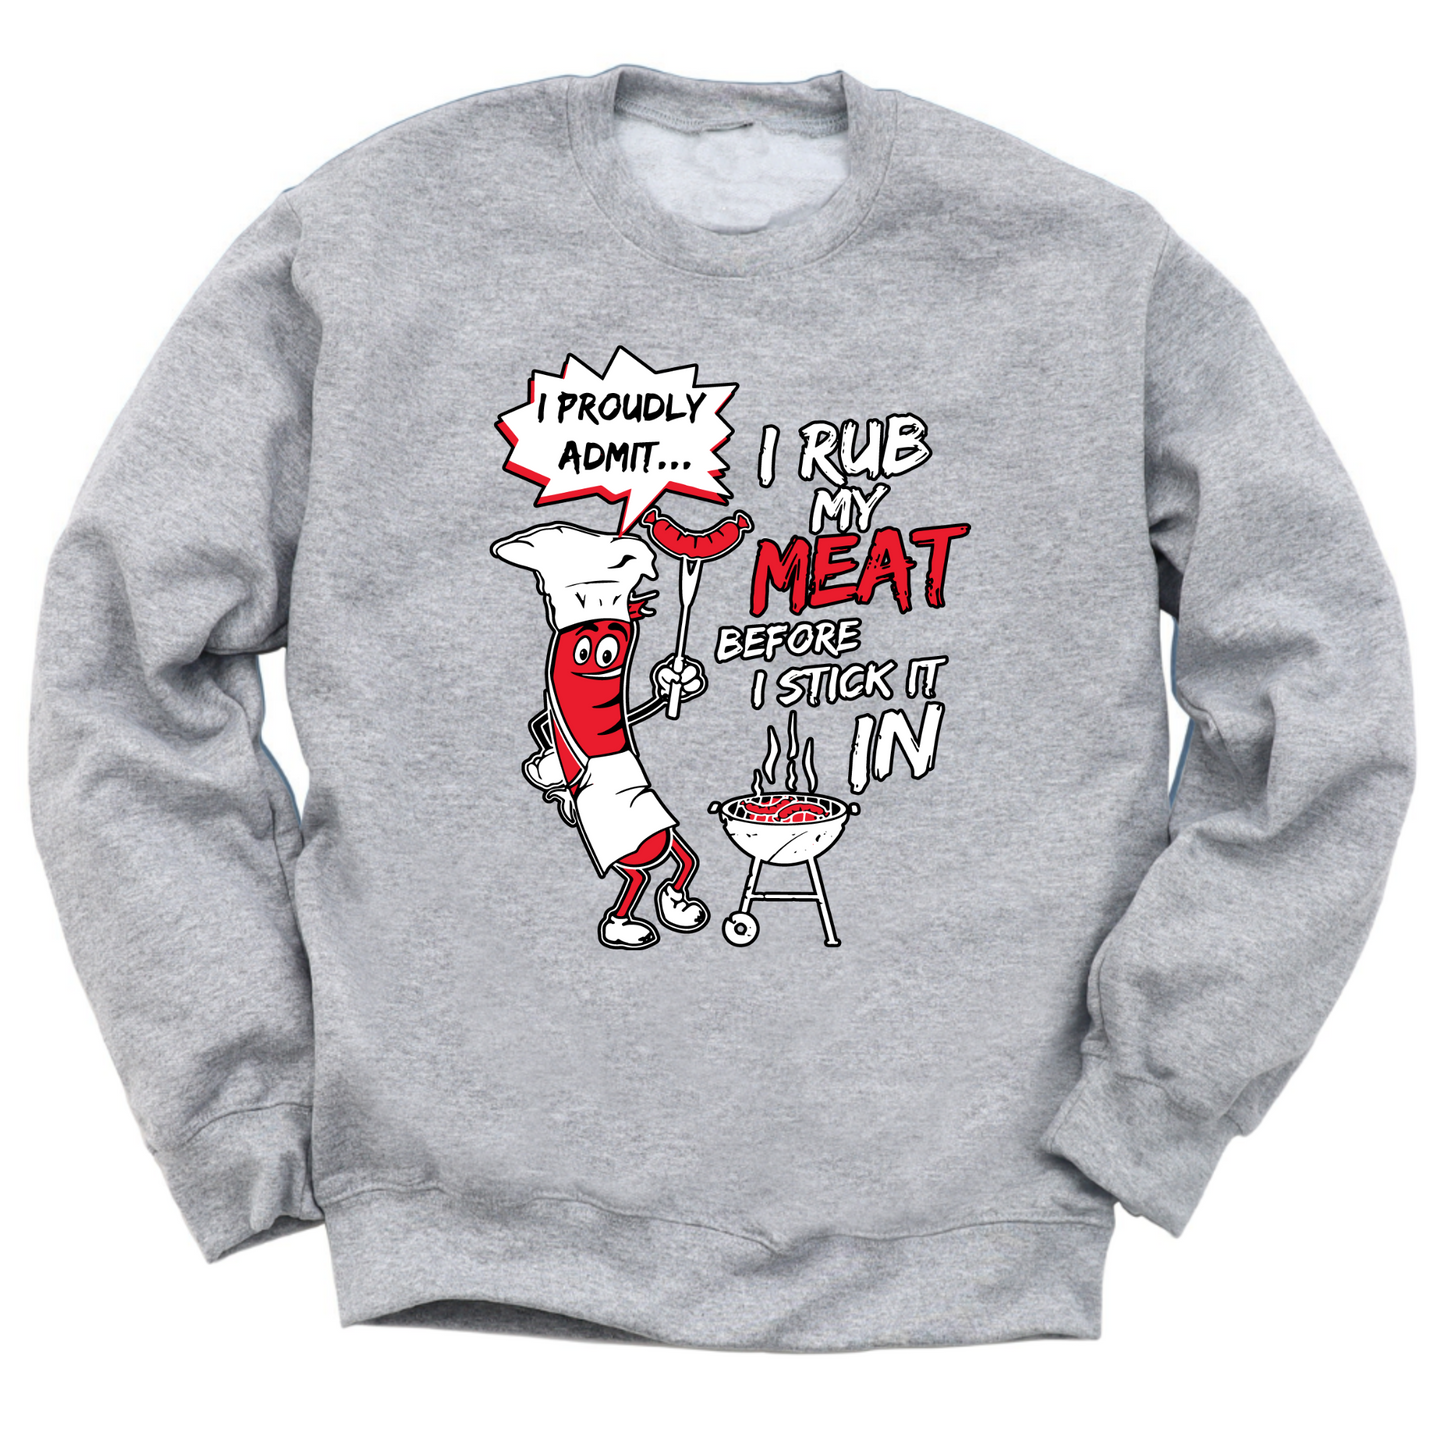 I Rub My Meat Before I Stick It In Crewneck Sweater